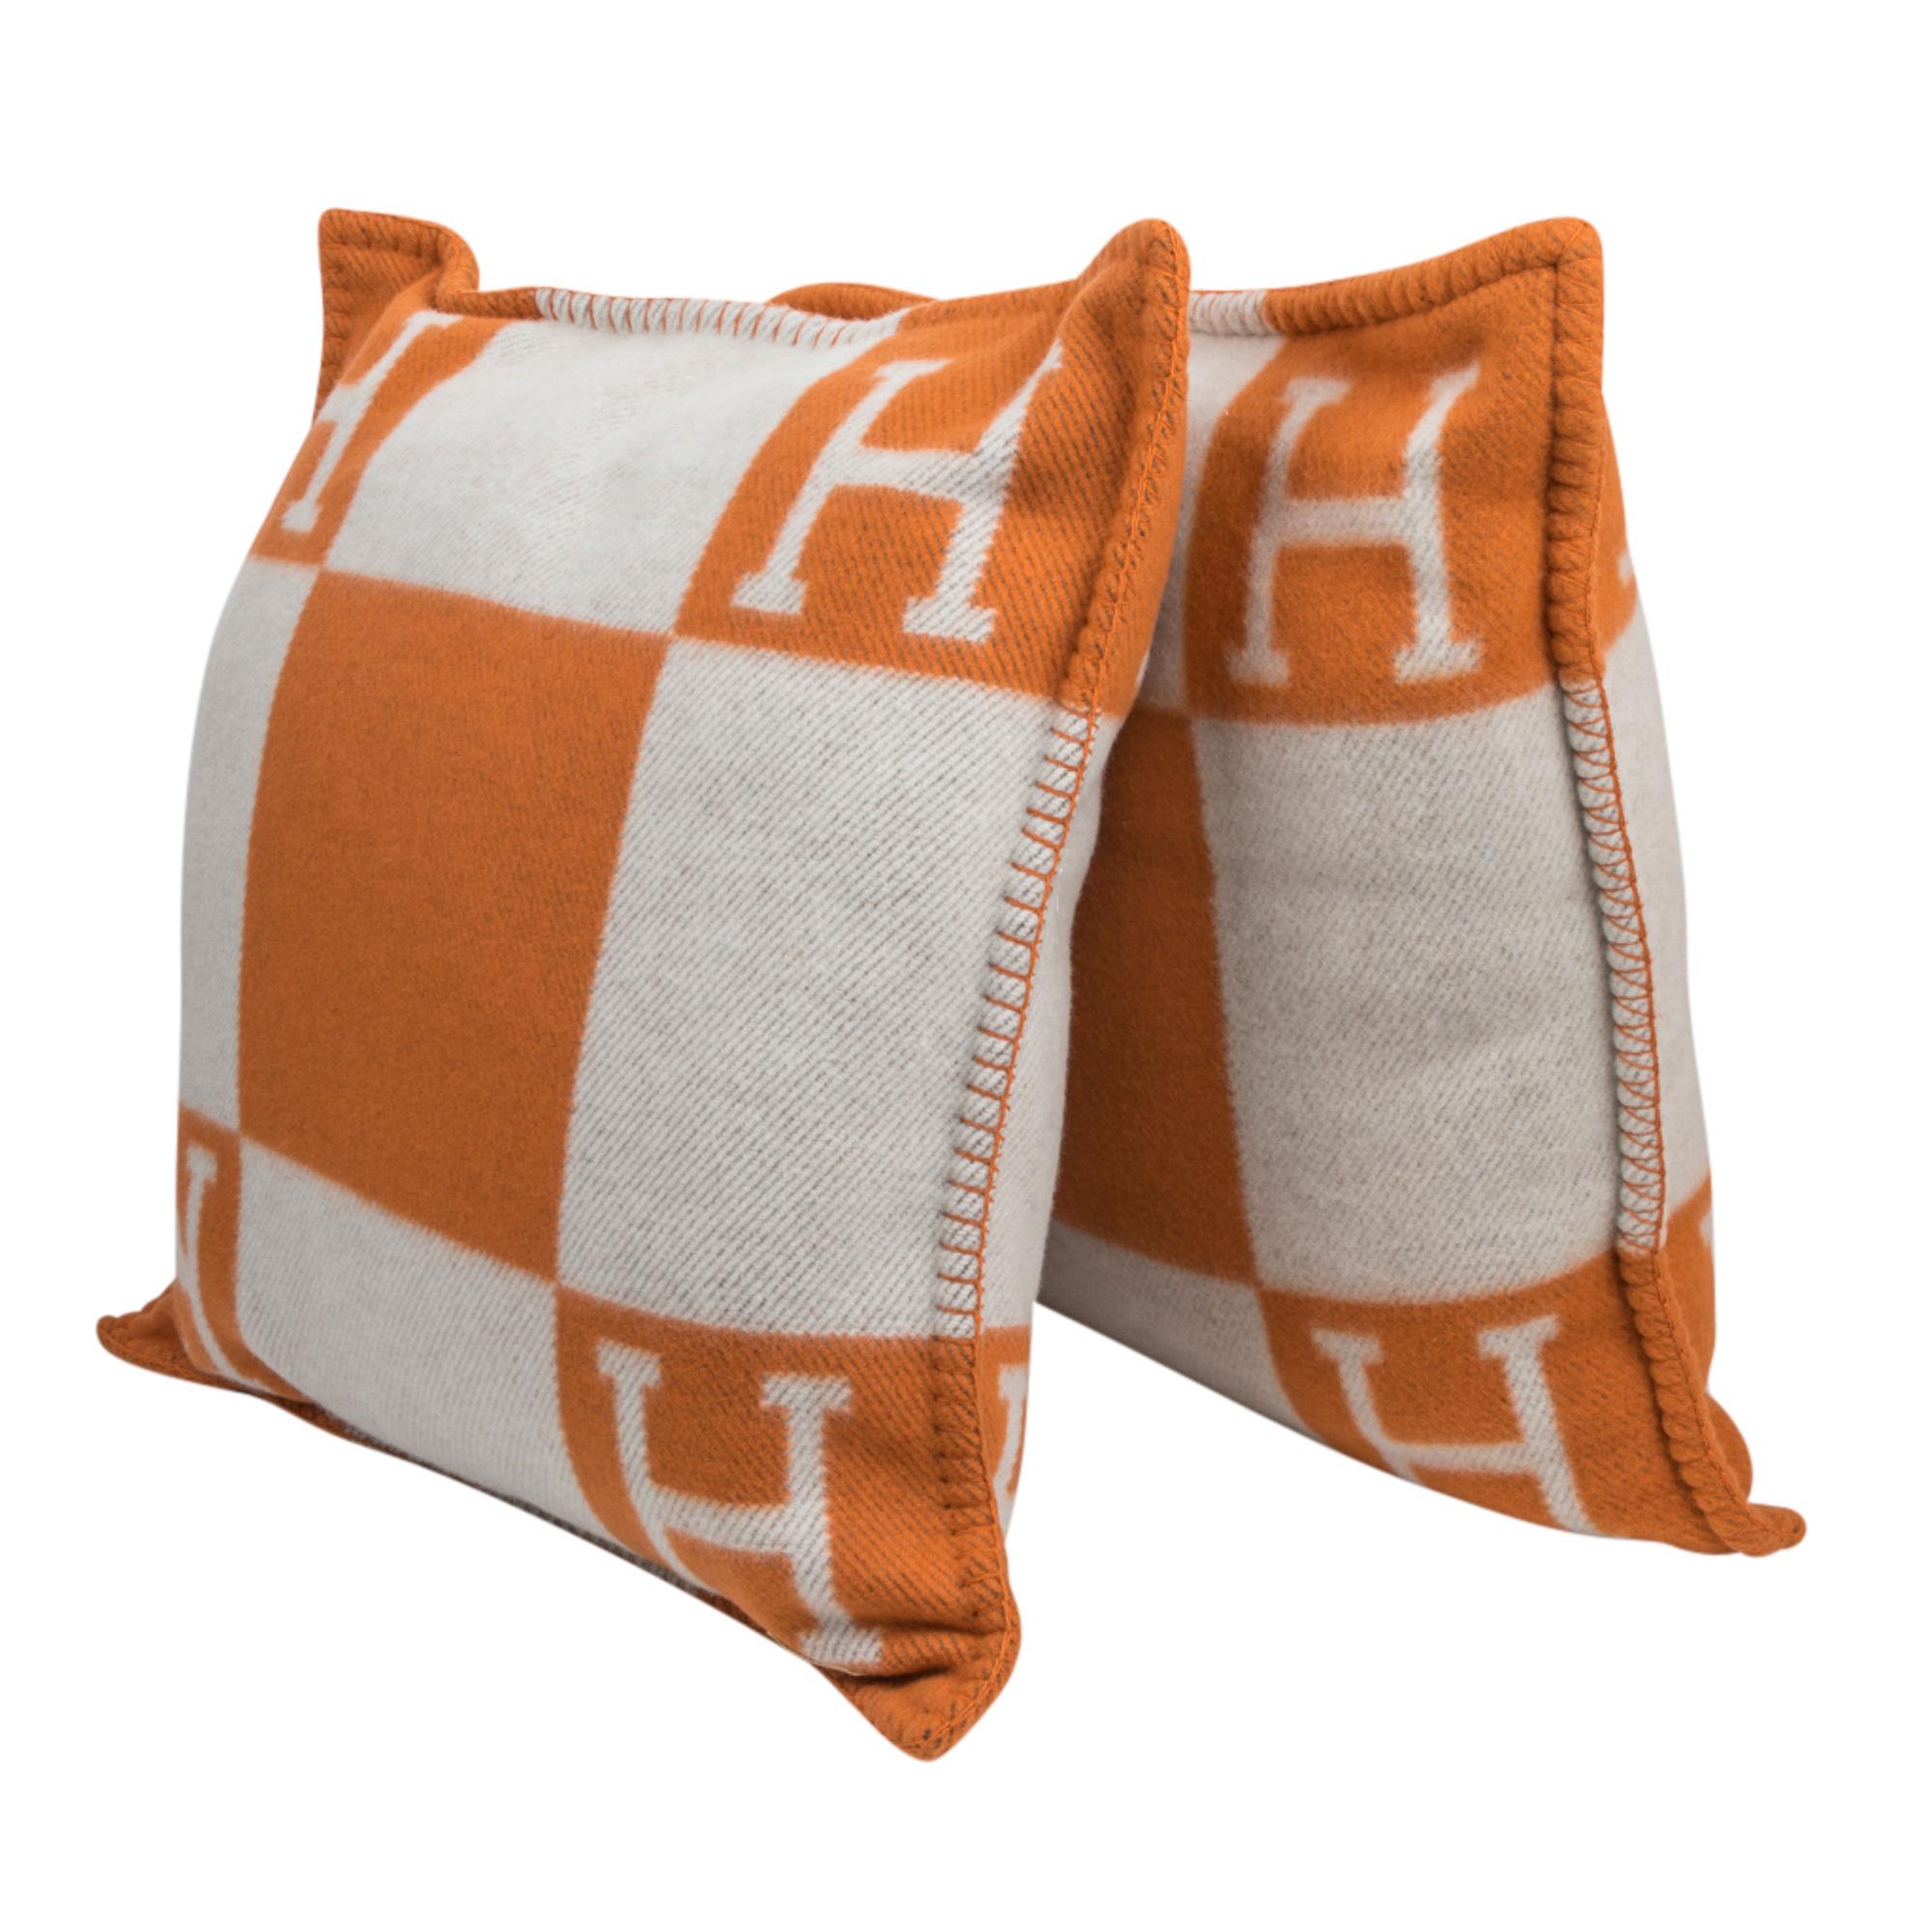 Mightychic offers a guaranteed authentic Hermes classic set of two PM Avalon I signature H pillow featured in Orange.
The removable cover is created from 85% Wool and 15% cashmere and has whip stitch edges.
New or Pristine Store Fresh Condition. 